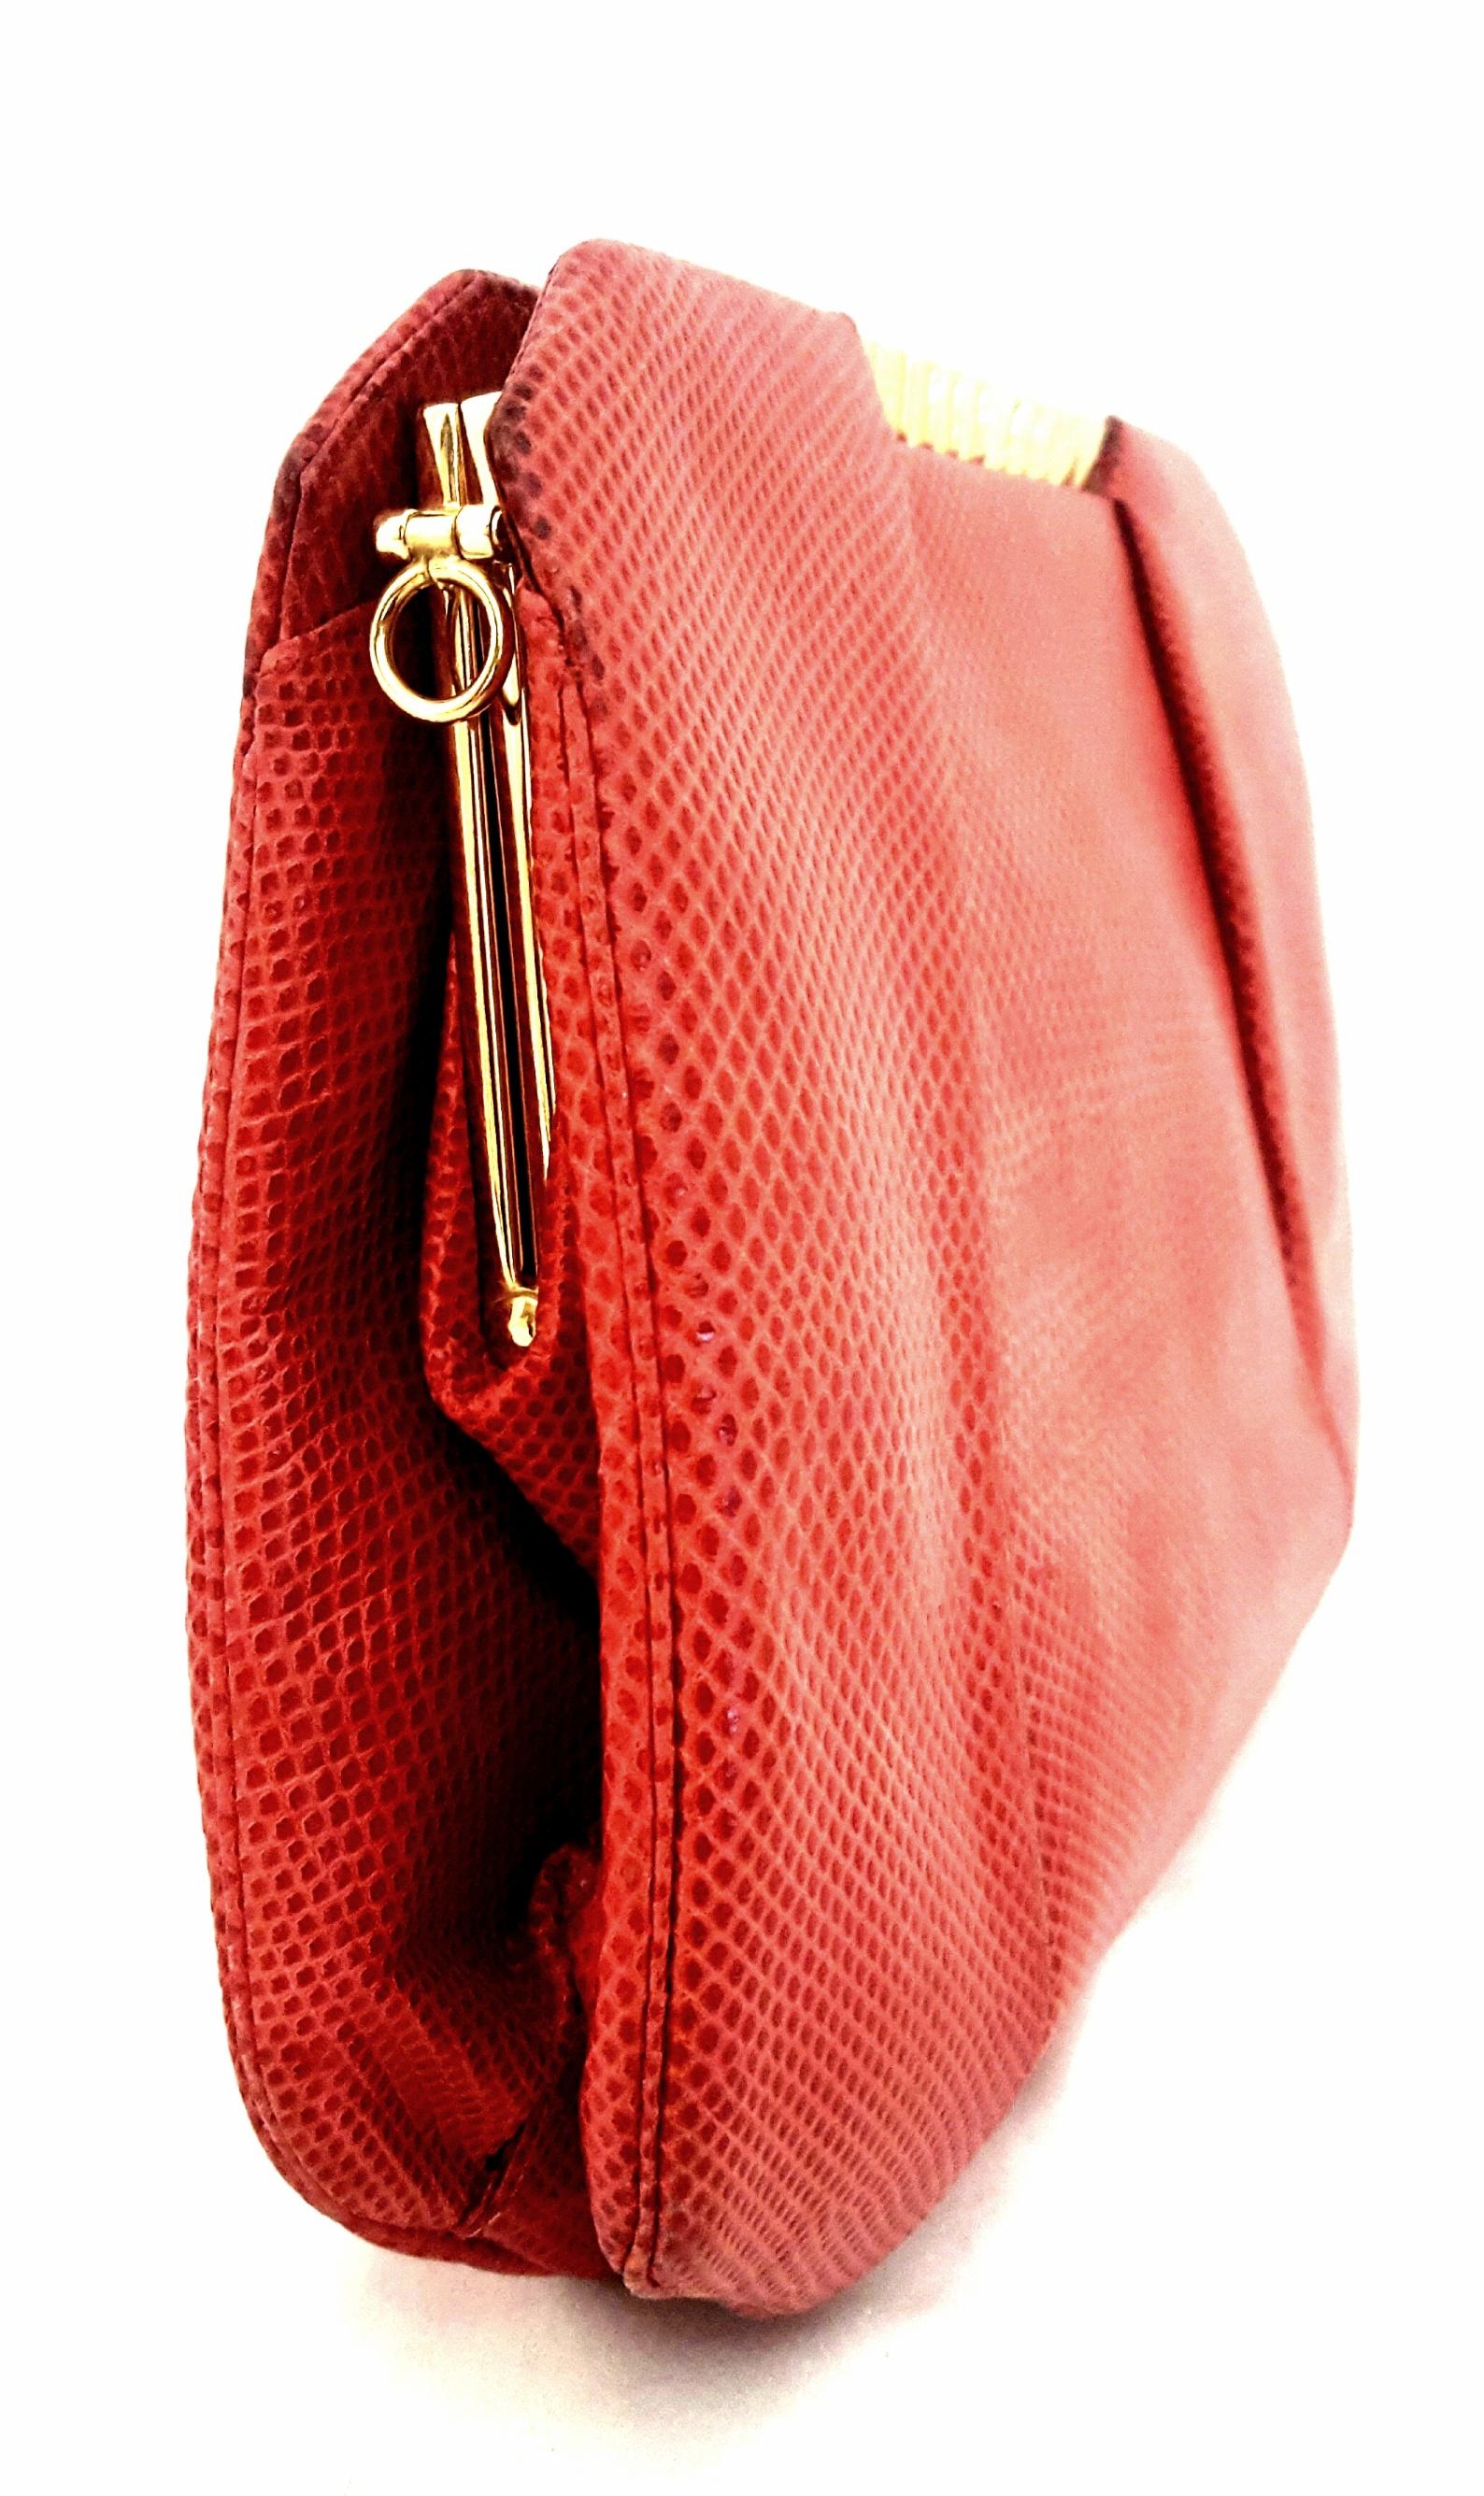 Judith Leiber 1970's vintage red Karung snakeskin bag. This bag is in good condition with minor wear on the bottom consistent with its age. It comes with a dust bag and coin purse. This beautiful bag has ribbed gold tone clasp.  Bag is lined in red